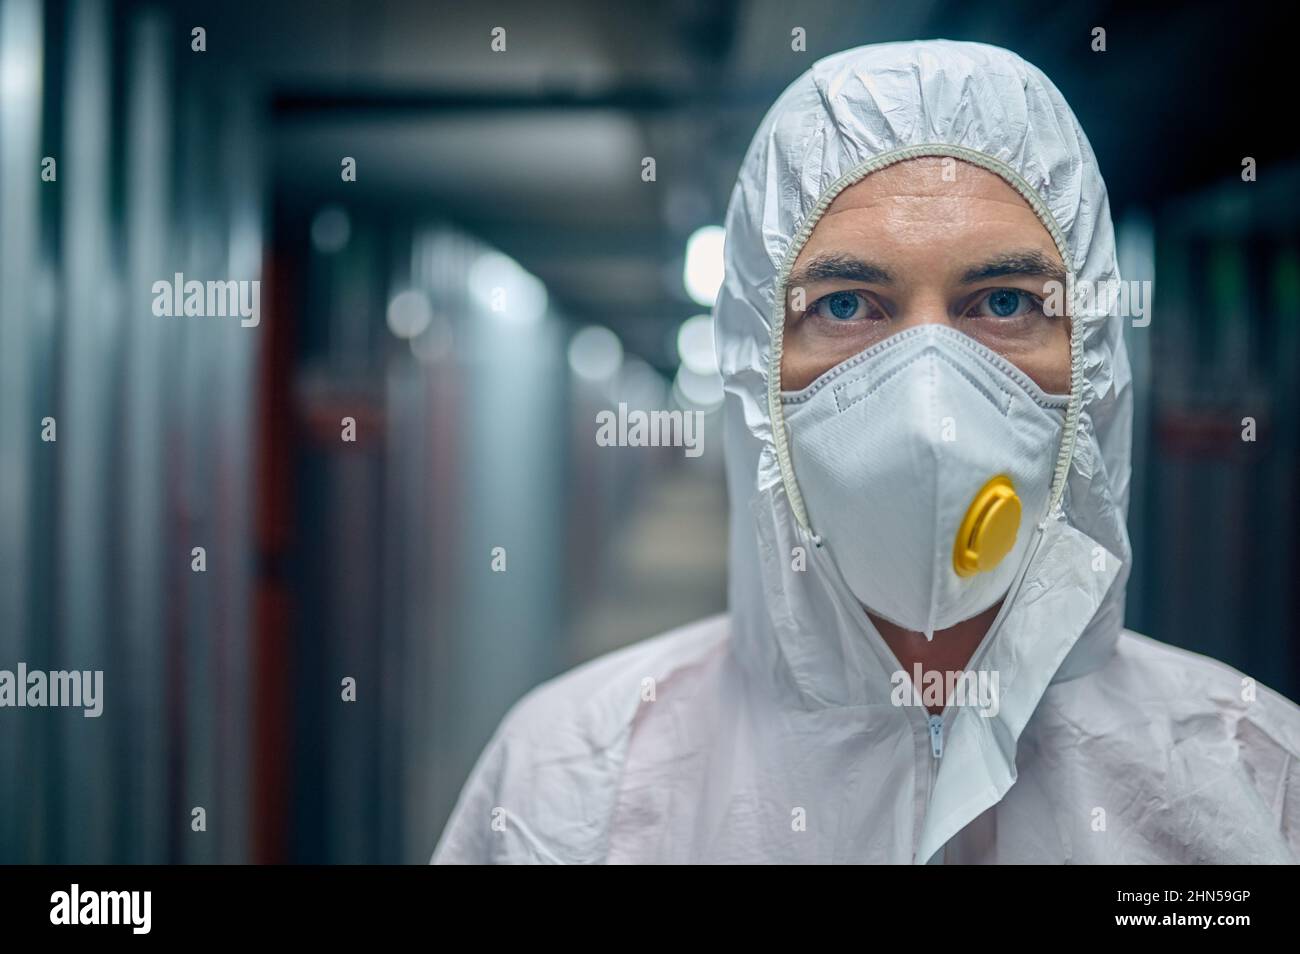 Worker wearing personal protective gear at work Stock Photo